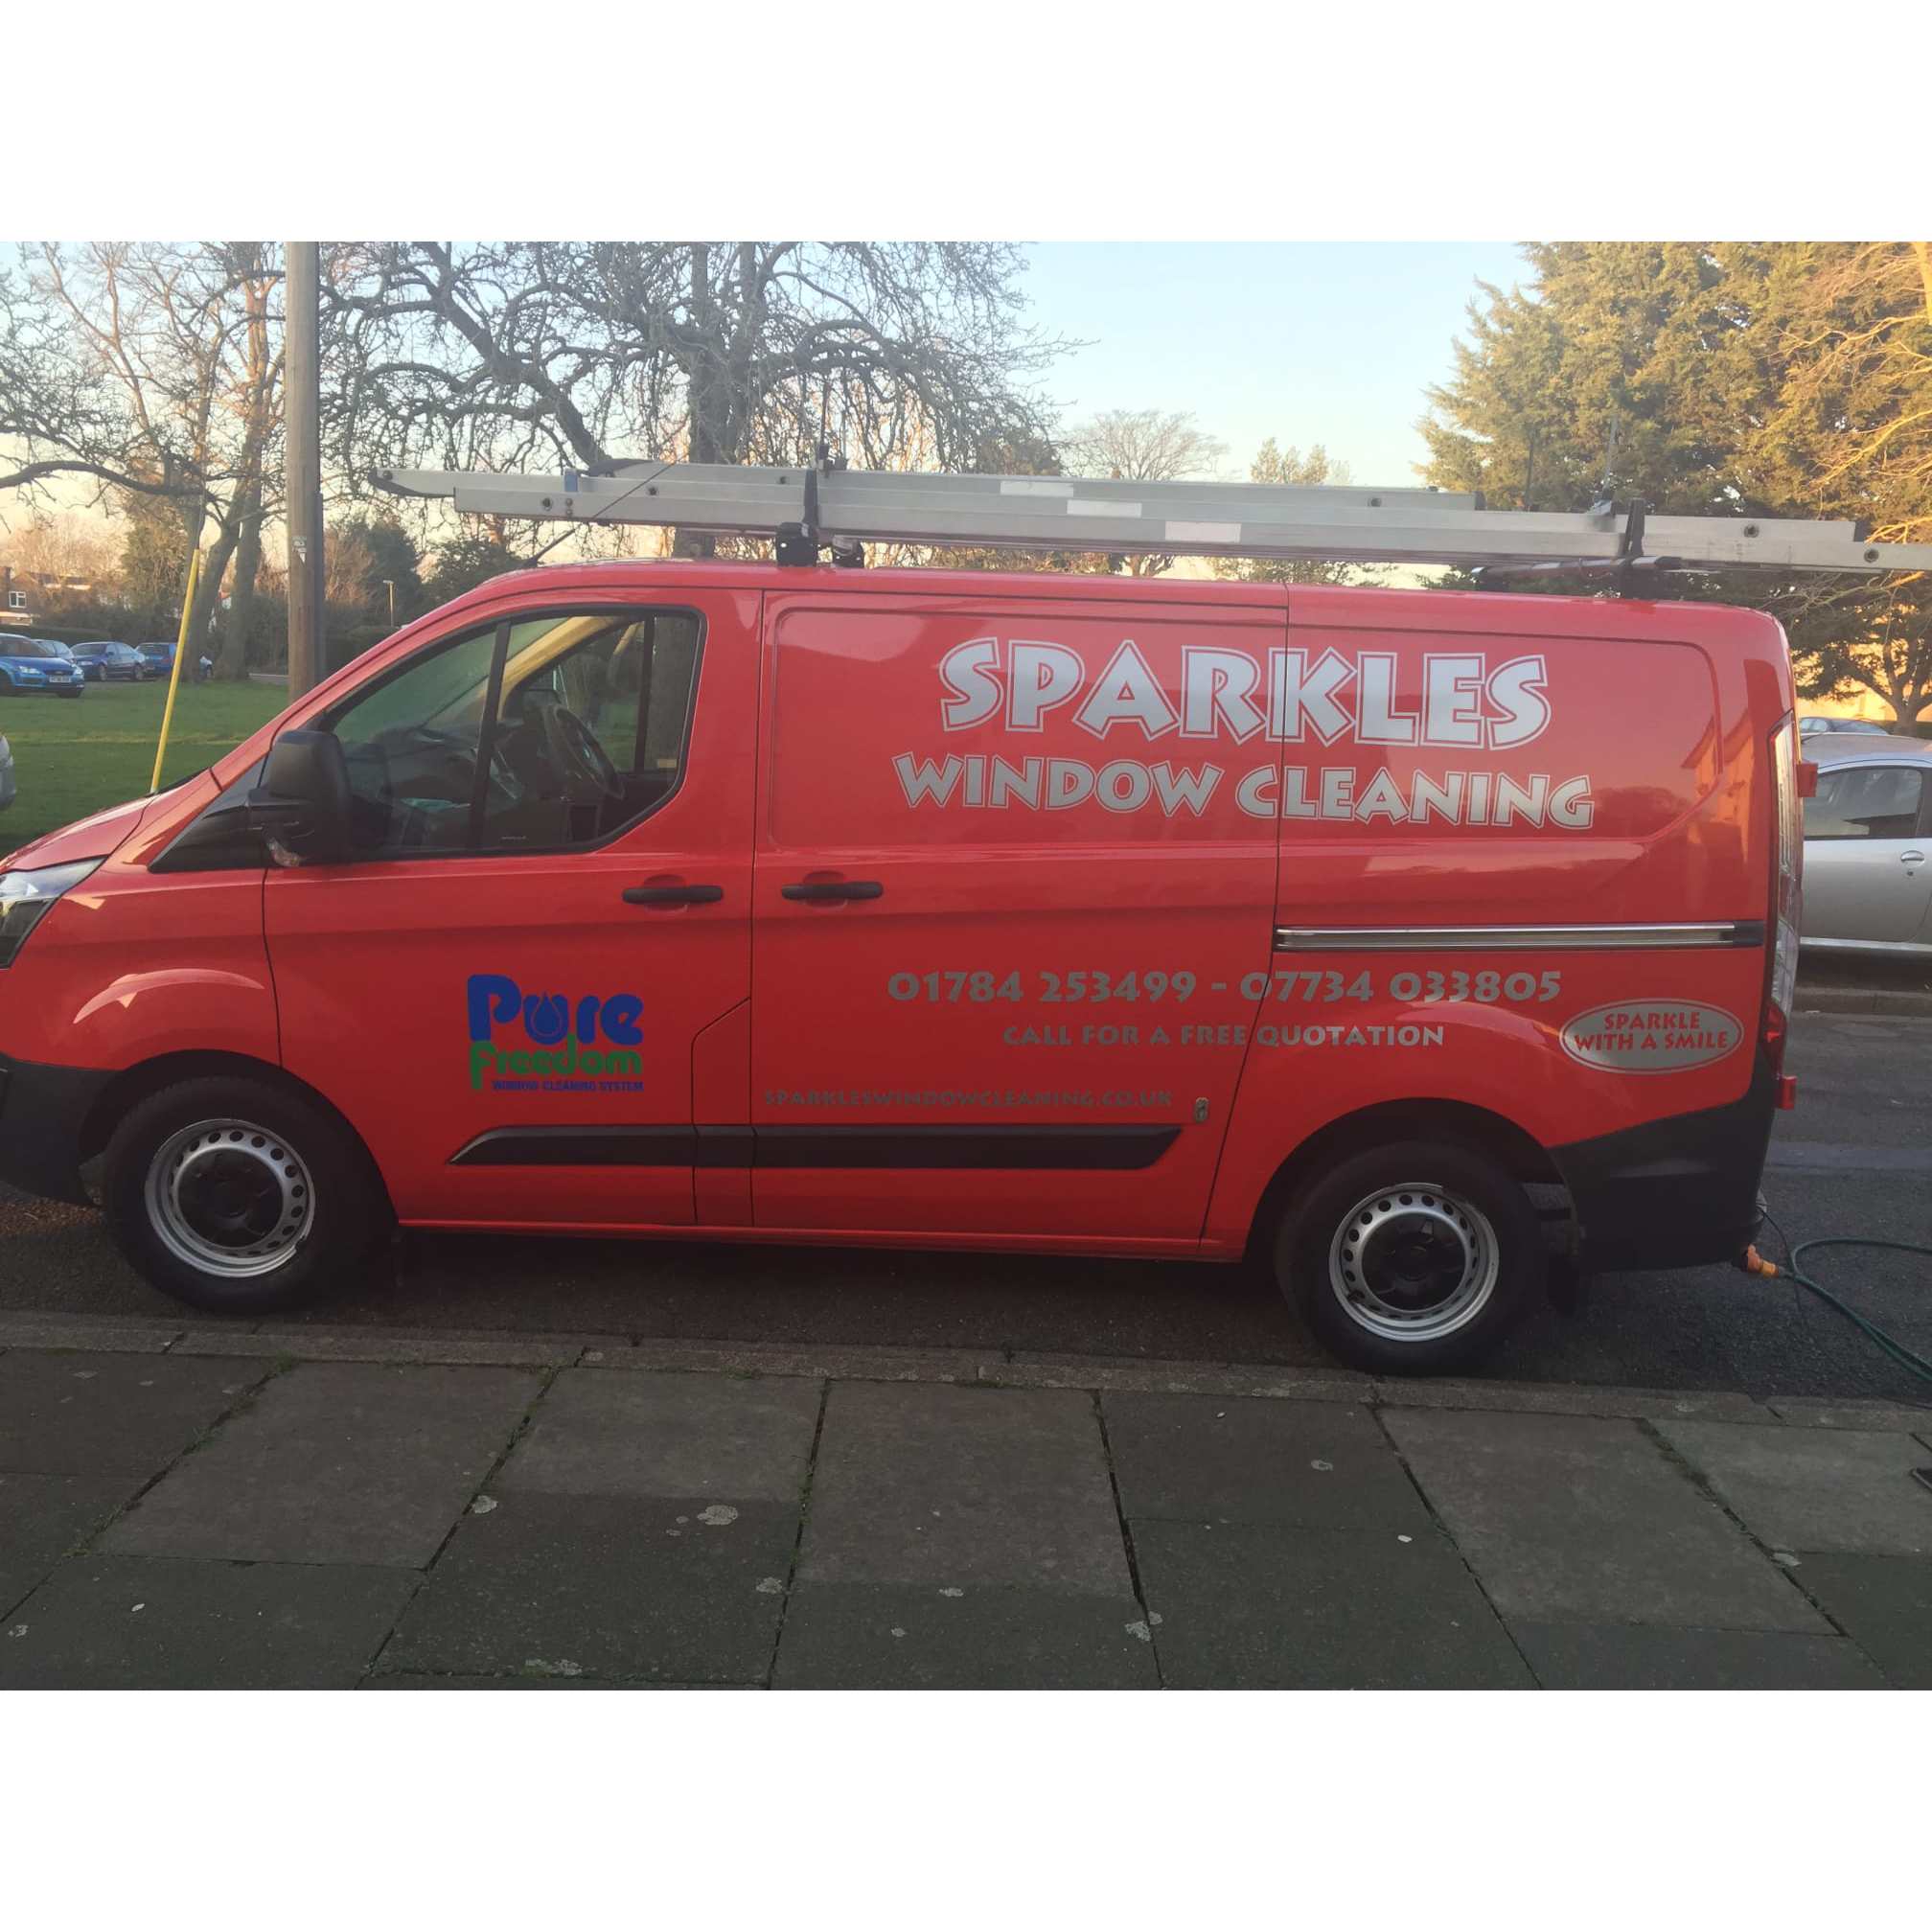 Sparkles Window Cleaning Services Logo